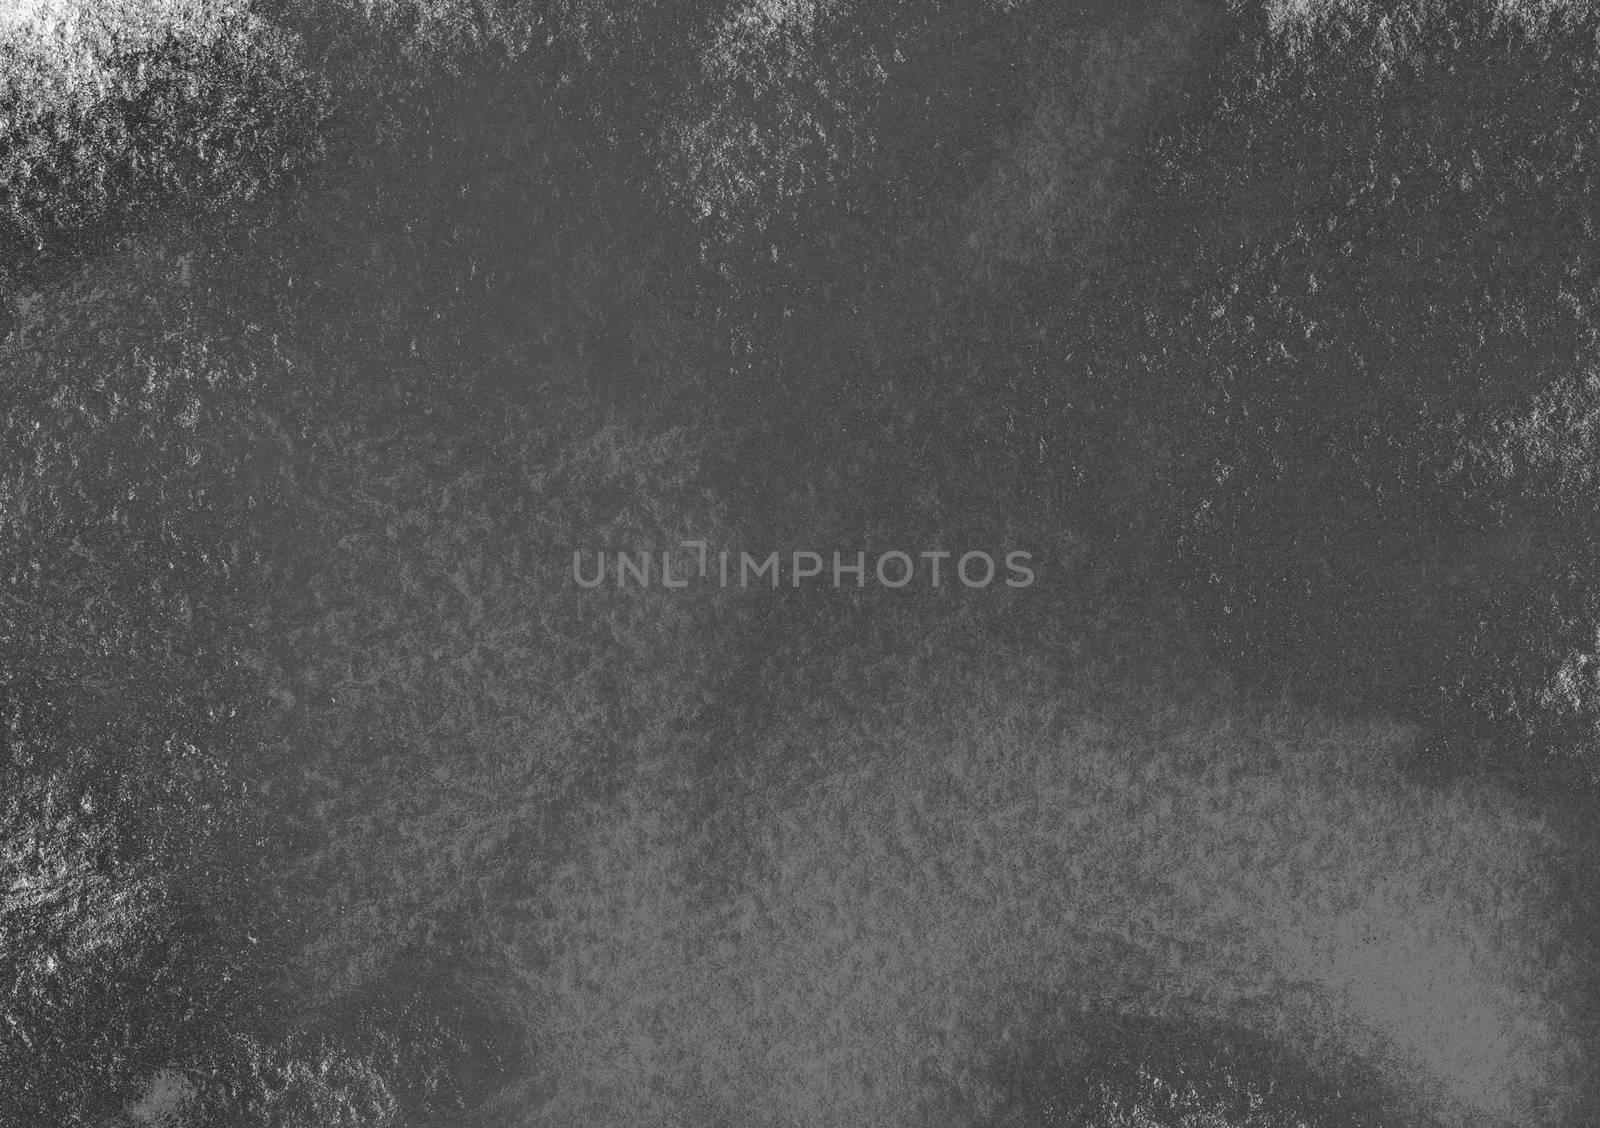 Monochrome dark paper texture. Grunge pattern. Raster illustration with space for text, for media advertising website fashion concept design, banner